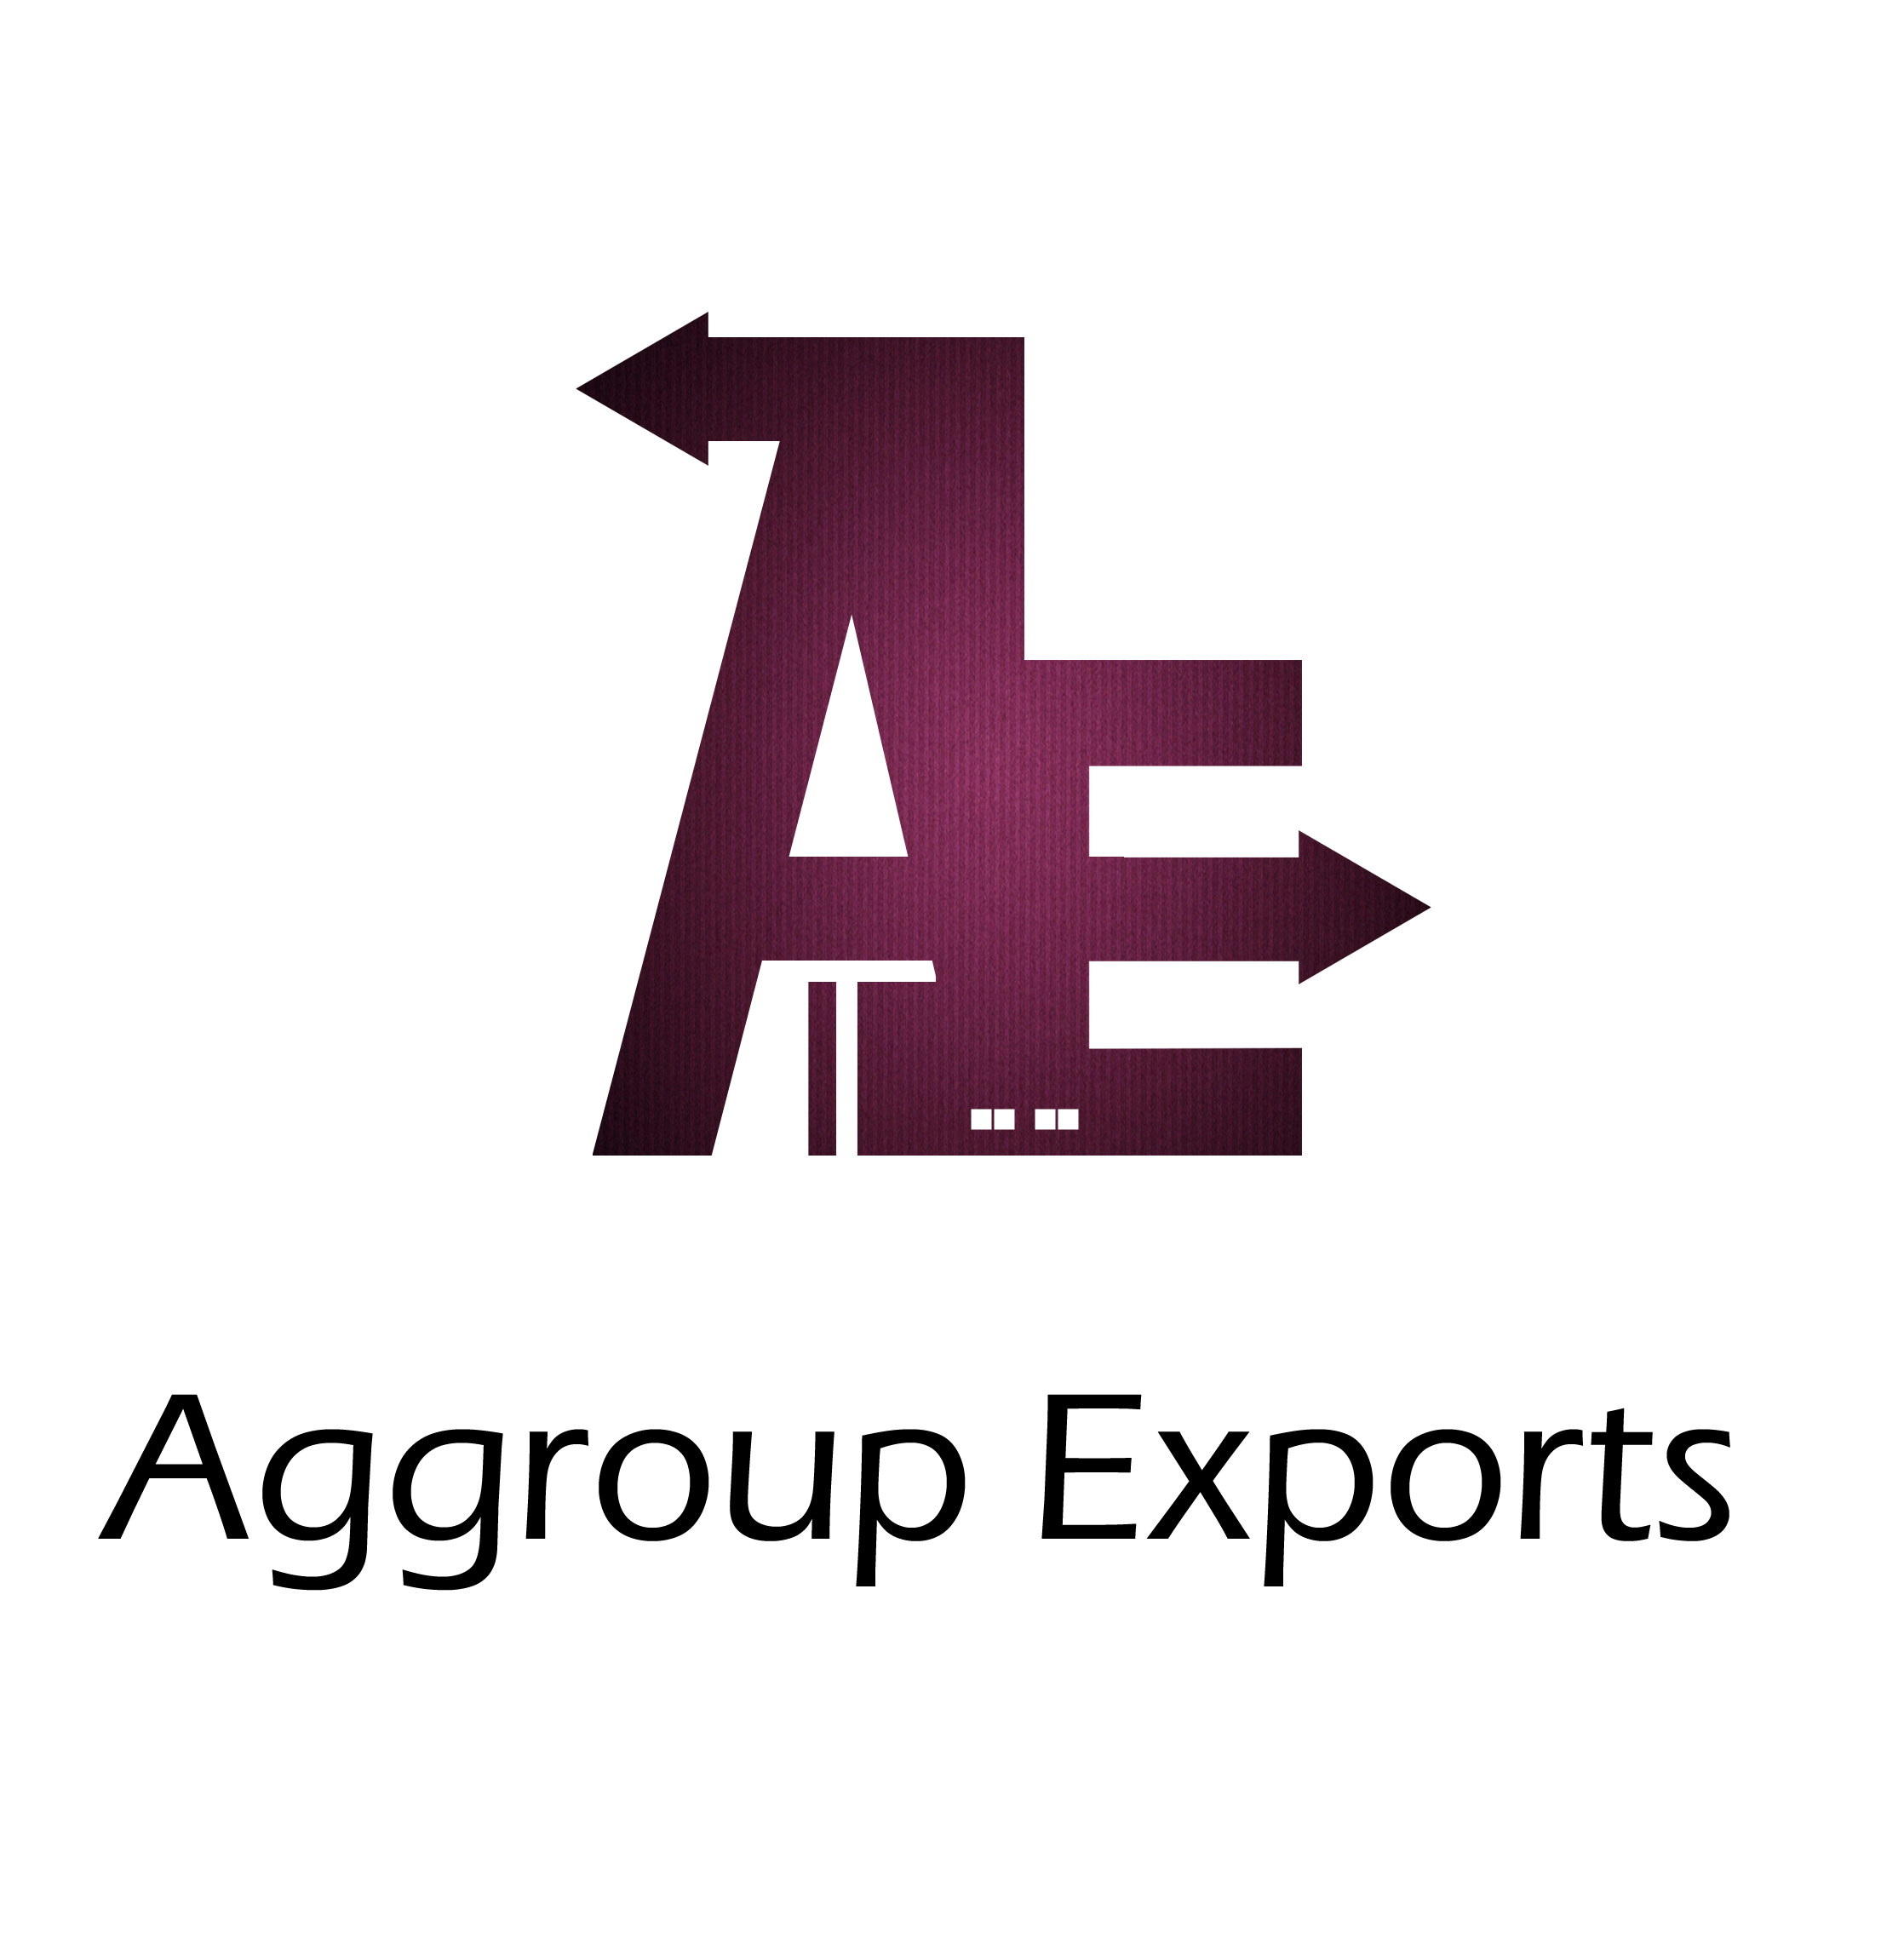 Aggroup Exports